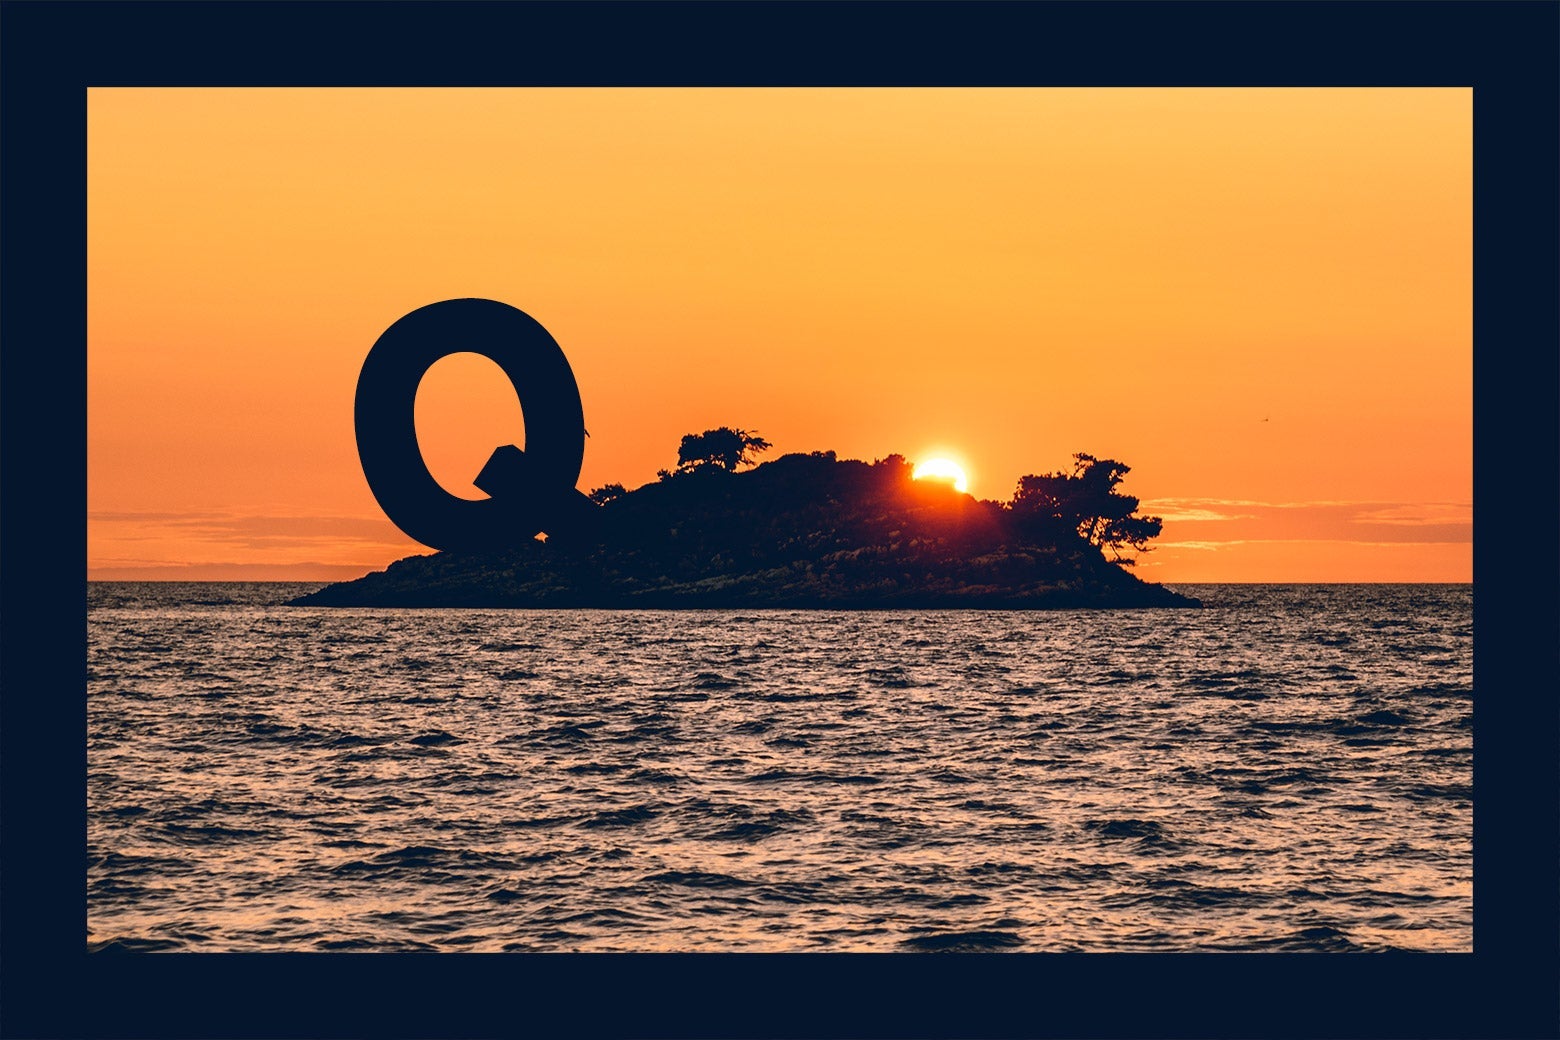 A deserted island at sunset with a large letter "Q" on it.